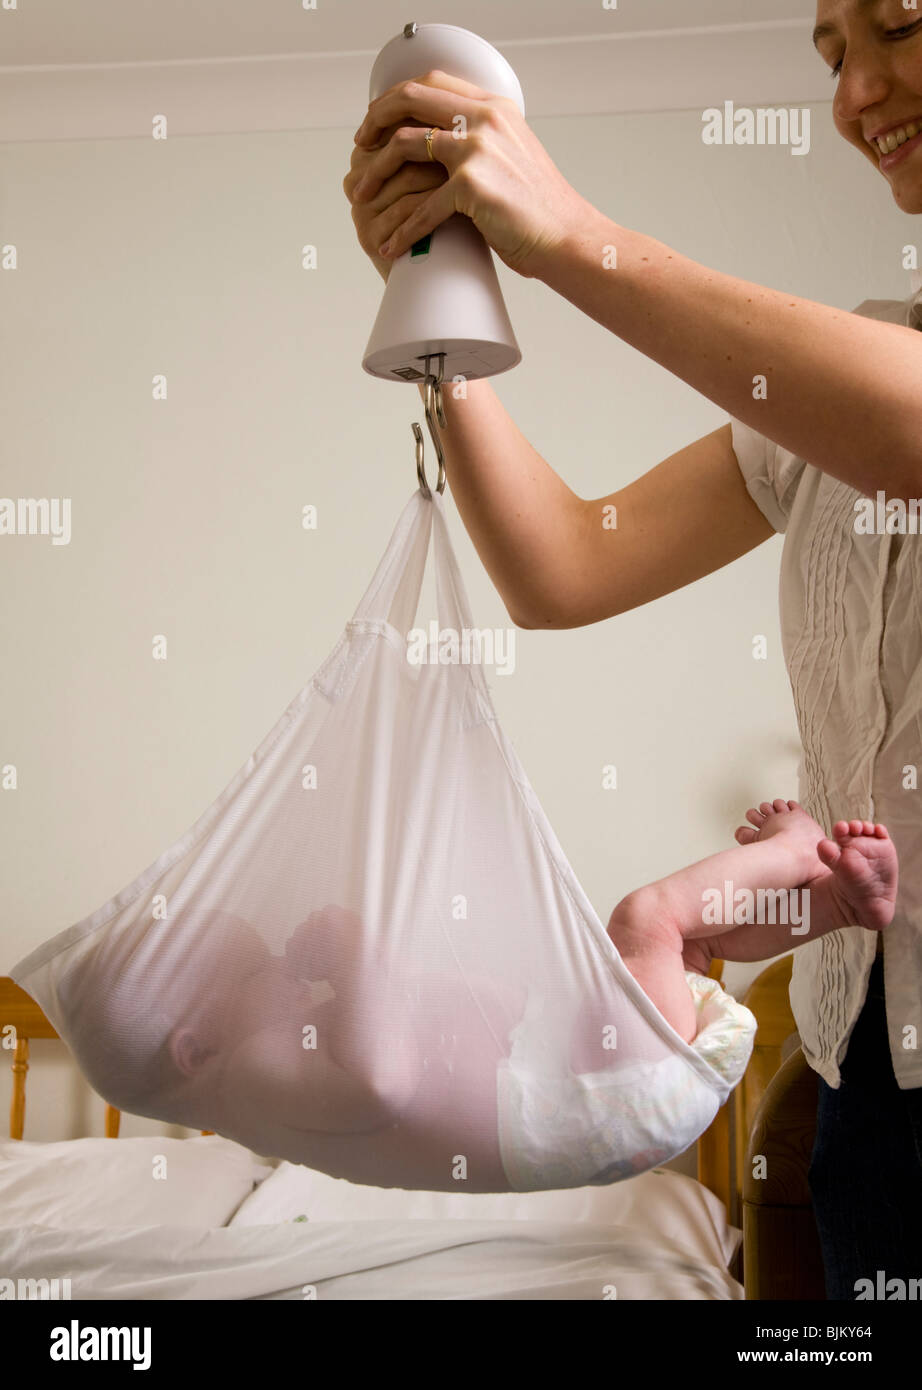 Weighing a newborn / new born baby with scales / weight scale. Stock Photo